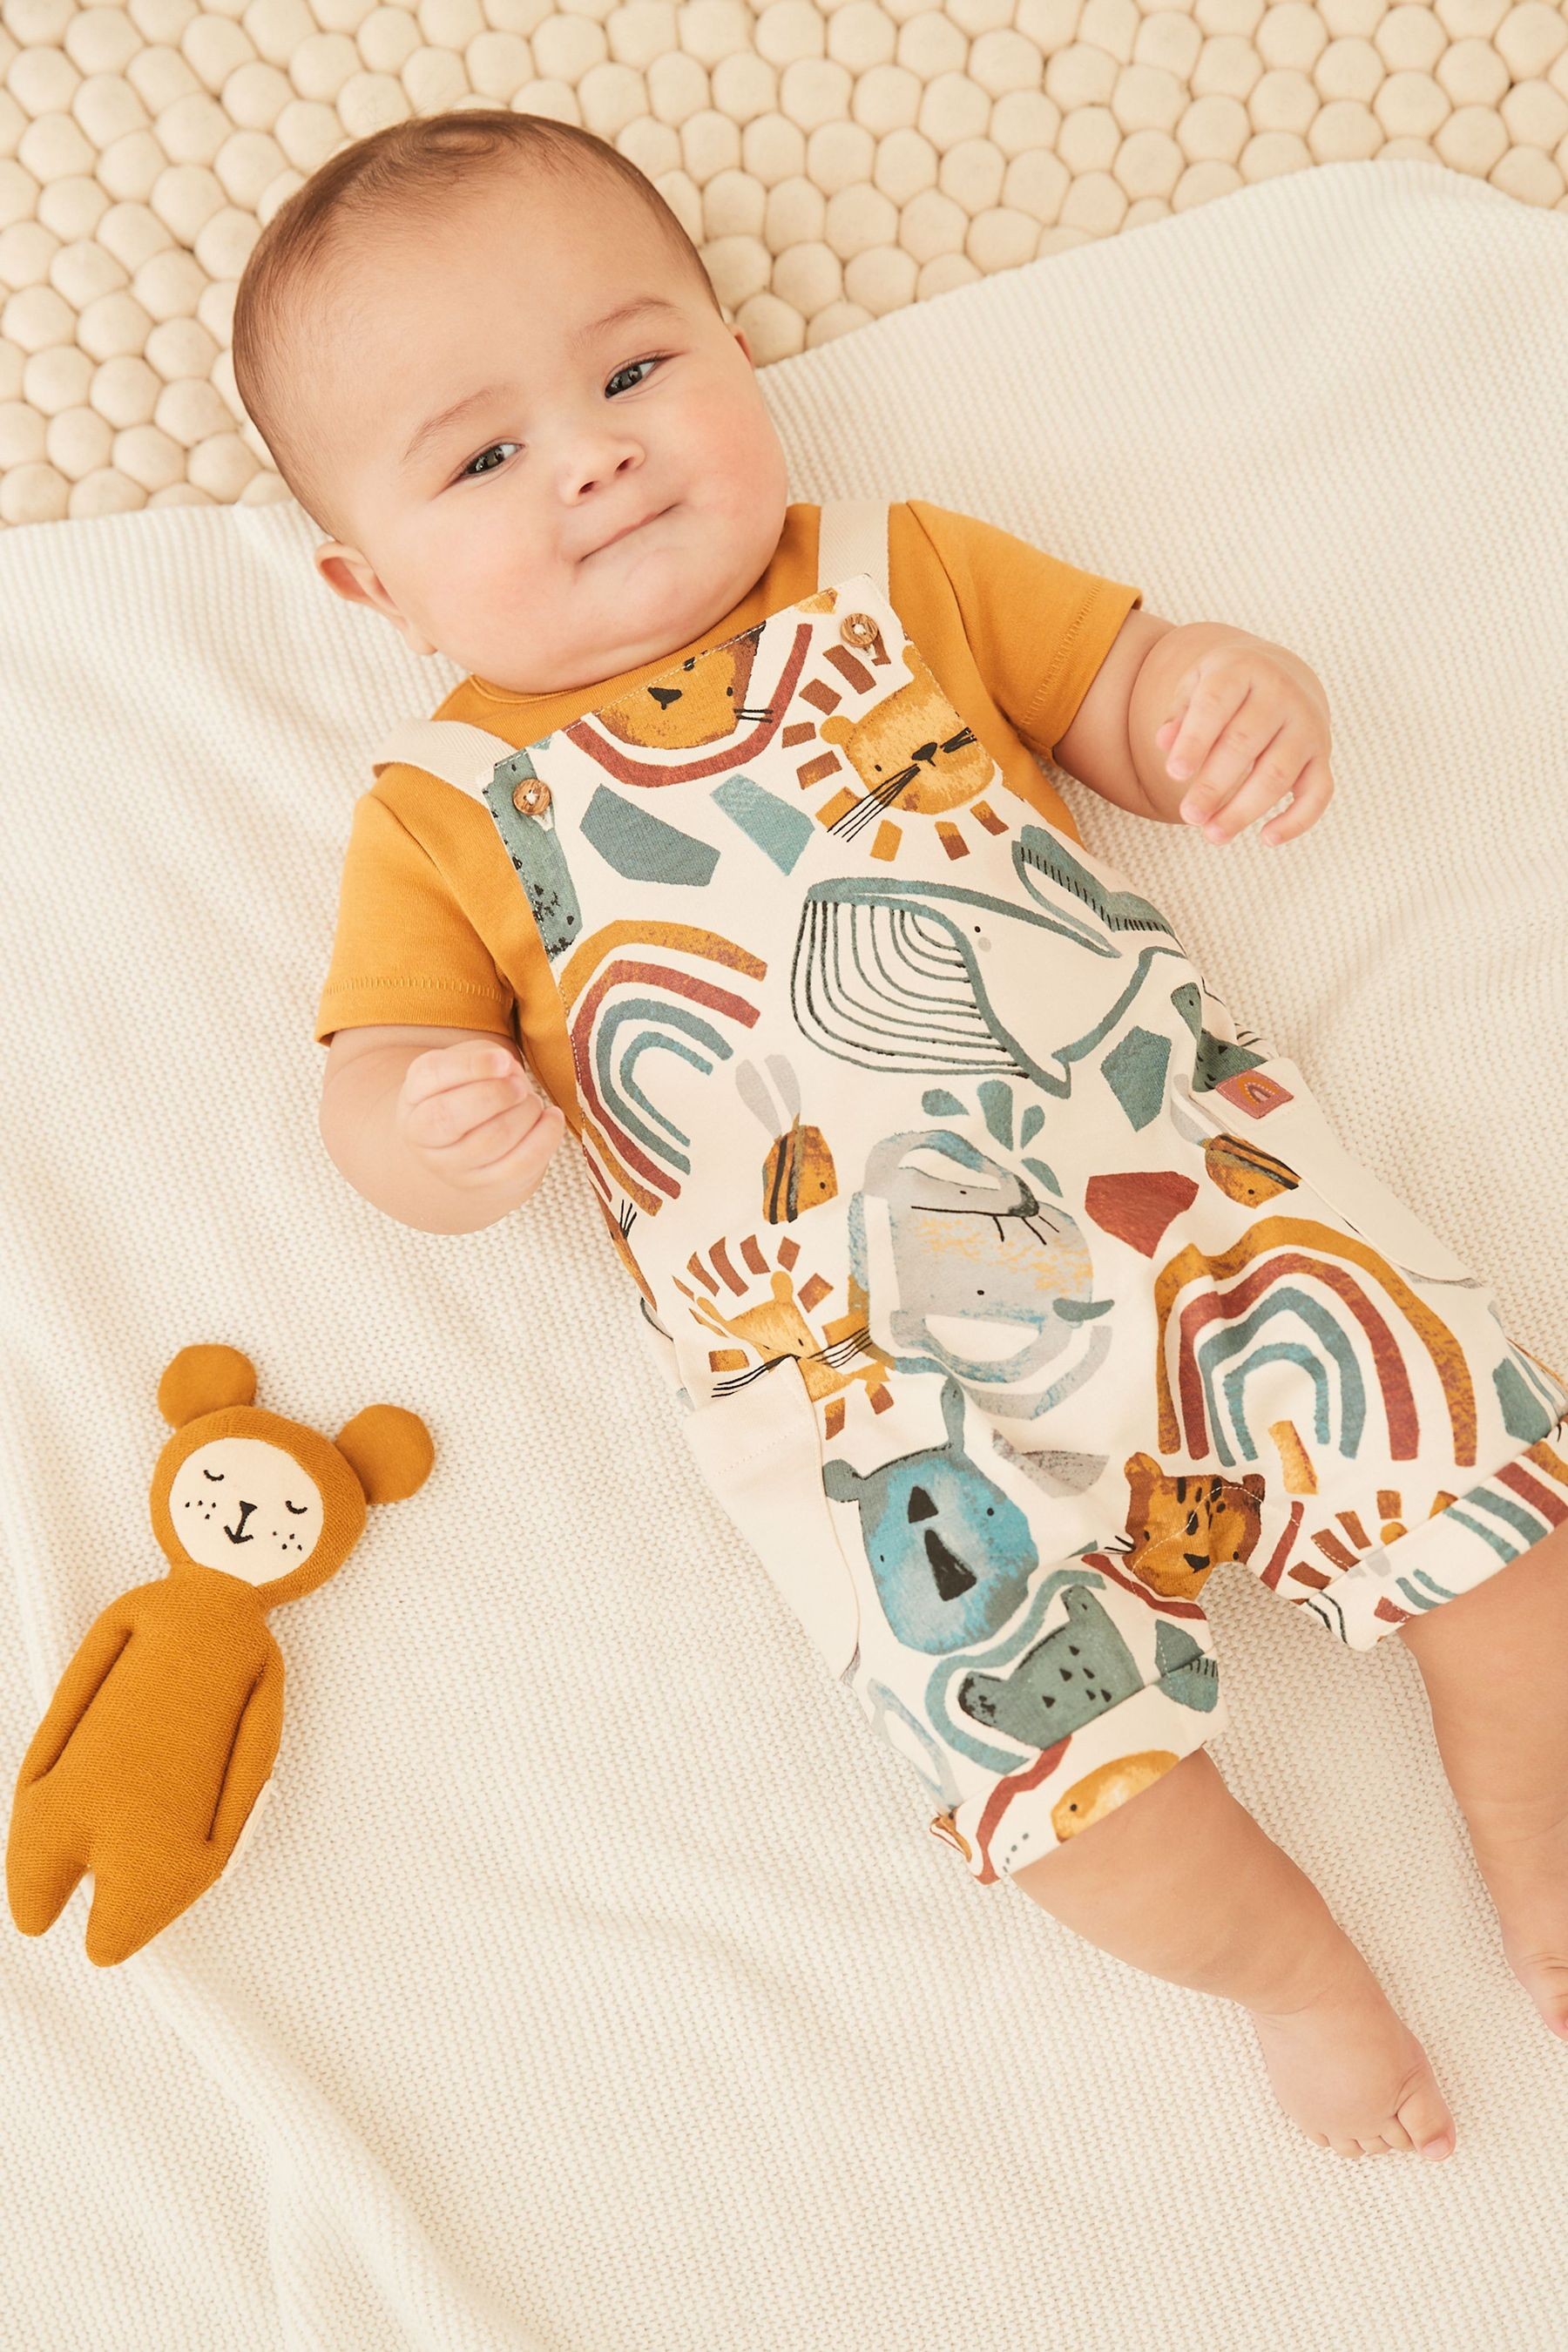 Baby Jersey Dungarees And Bodysuit Set (0mths-2yrs)